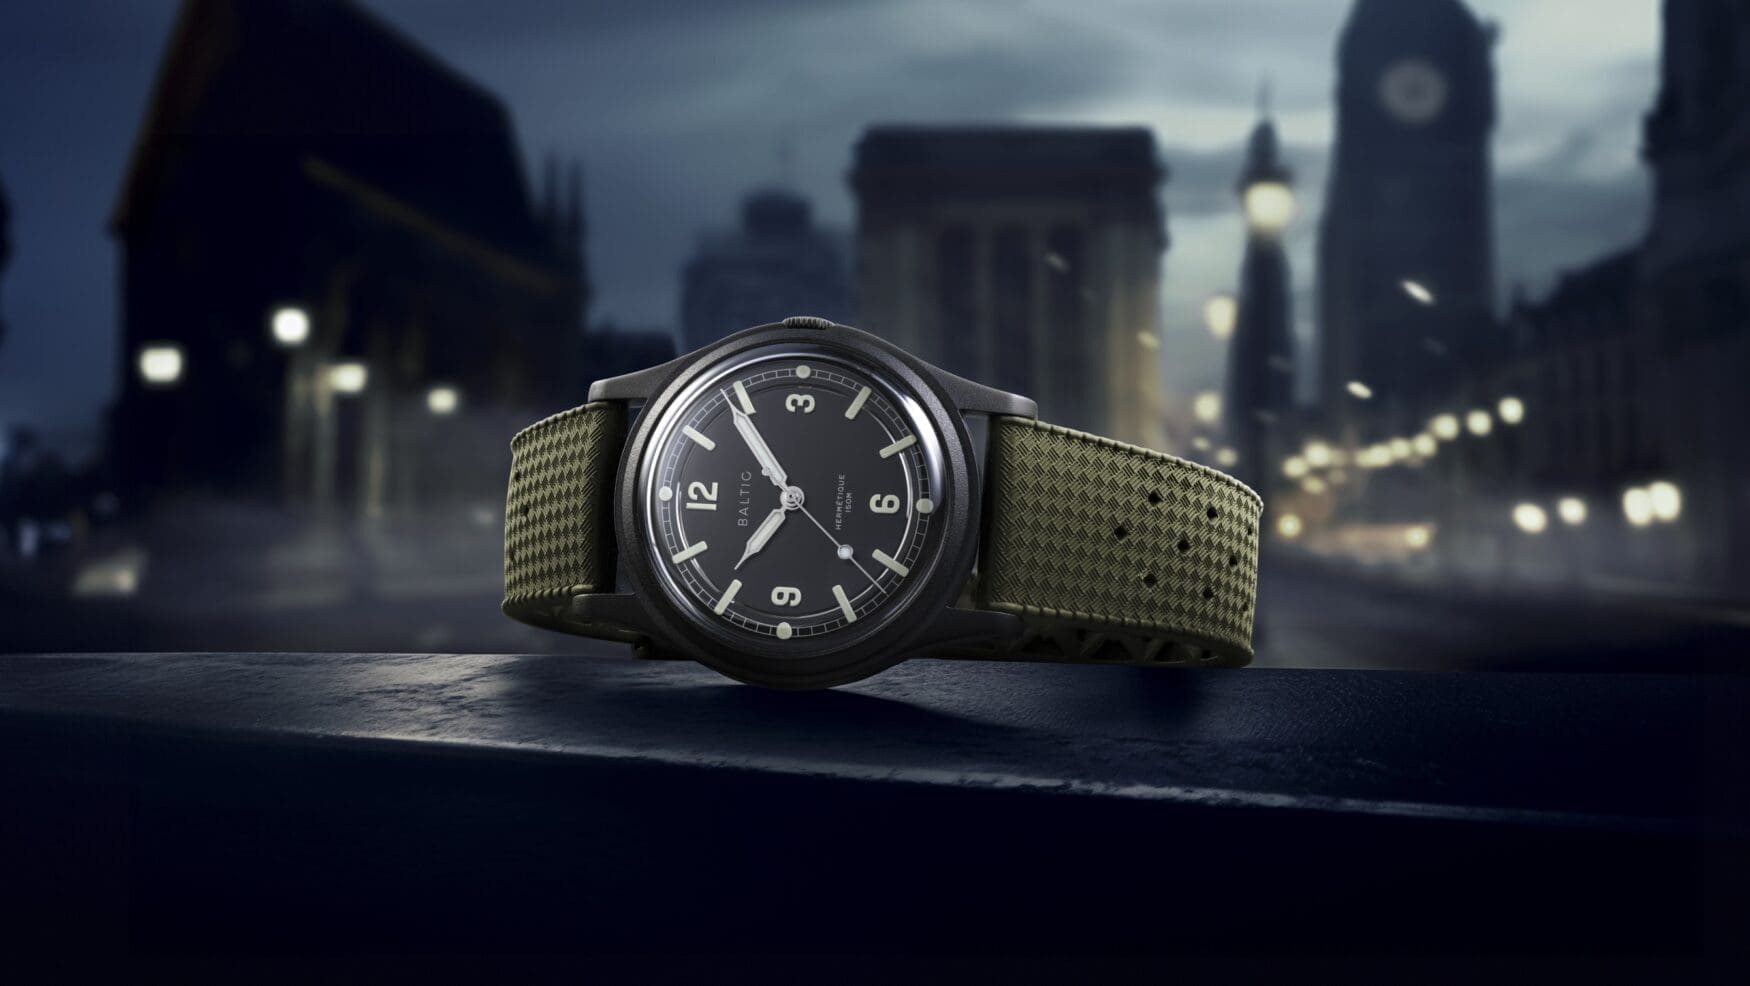 The Baltic x Time+Tide Hermétique Night Mode is a field watch for your field of dreams